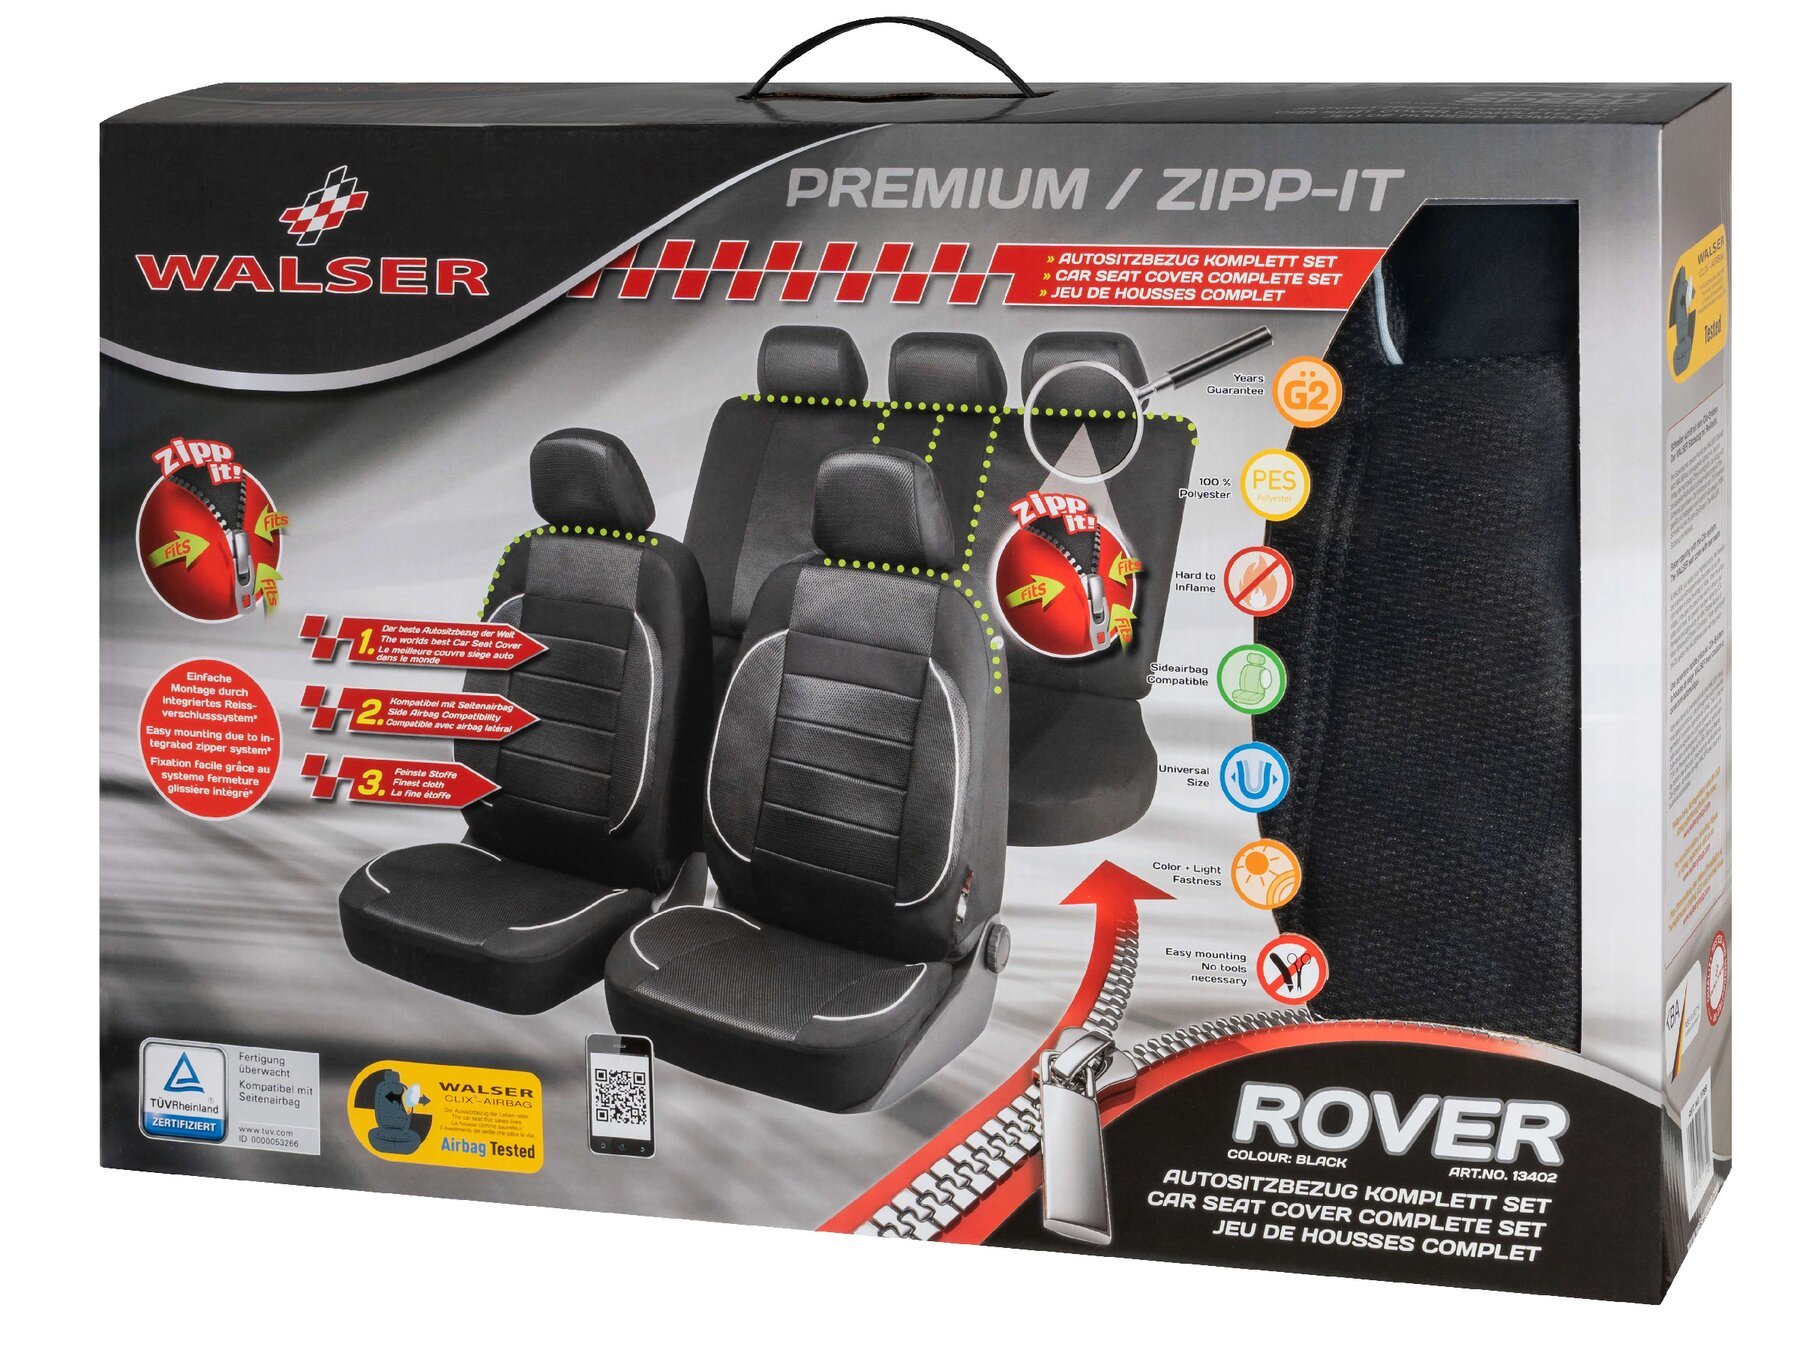 ZIPP IT Premium Rover car Seat covers complete set with zipper system